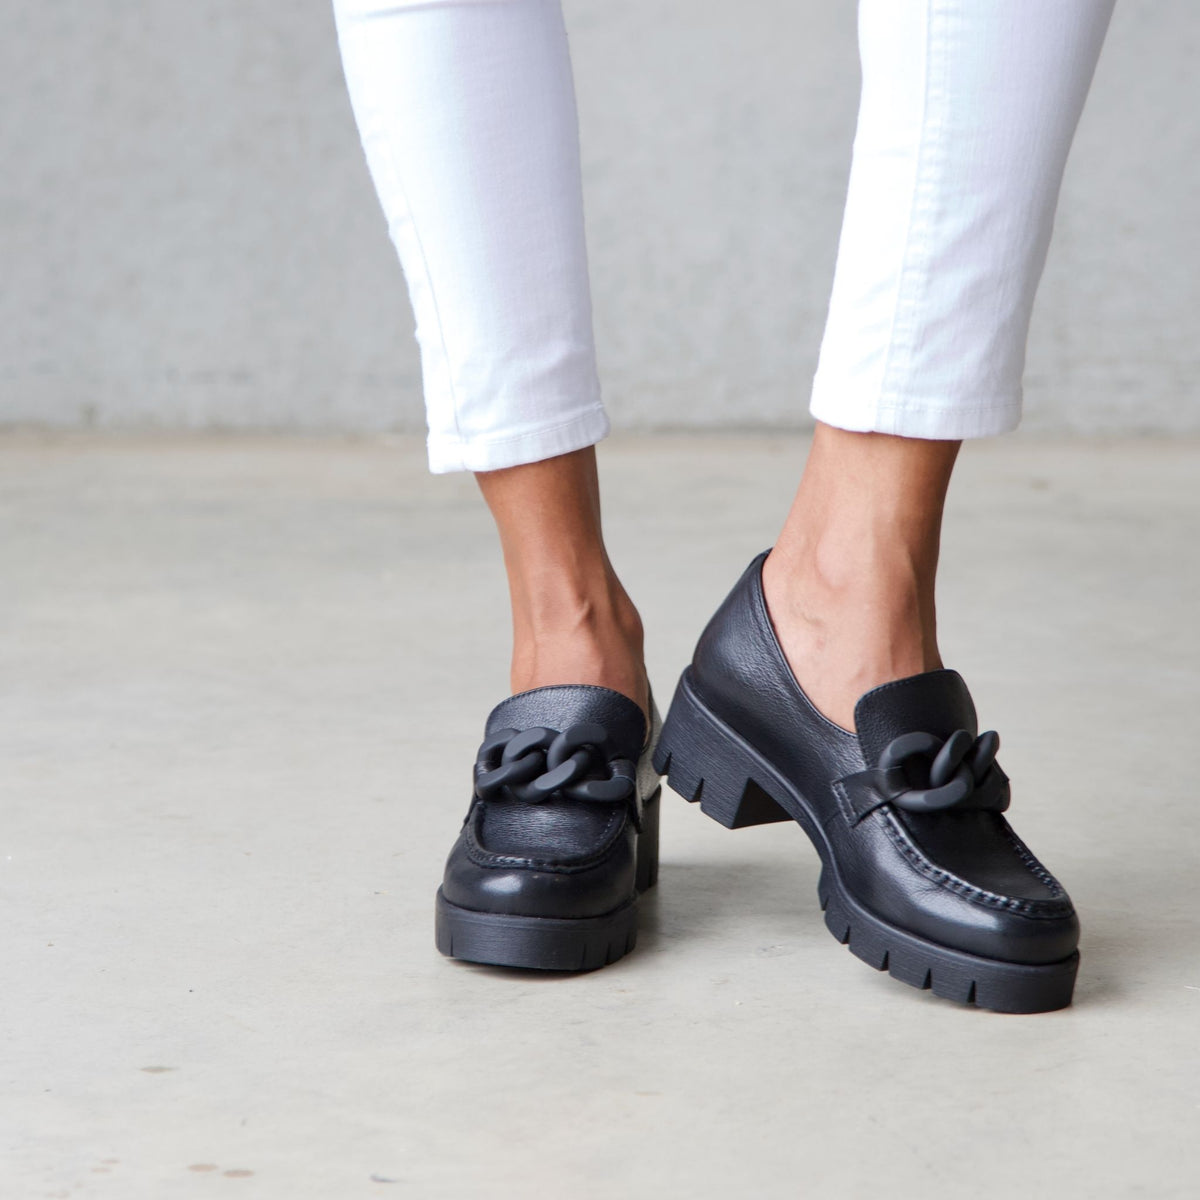 Hanini Black Leather Loafers